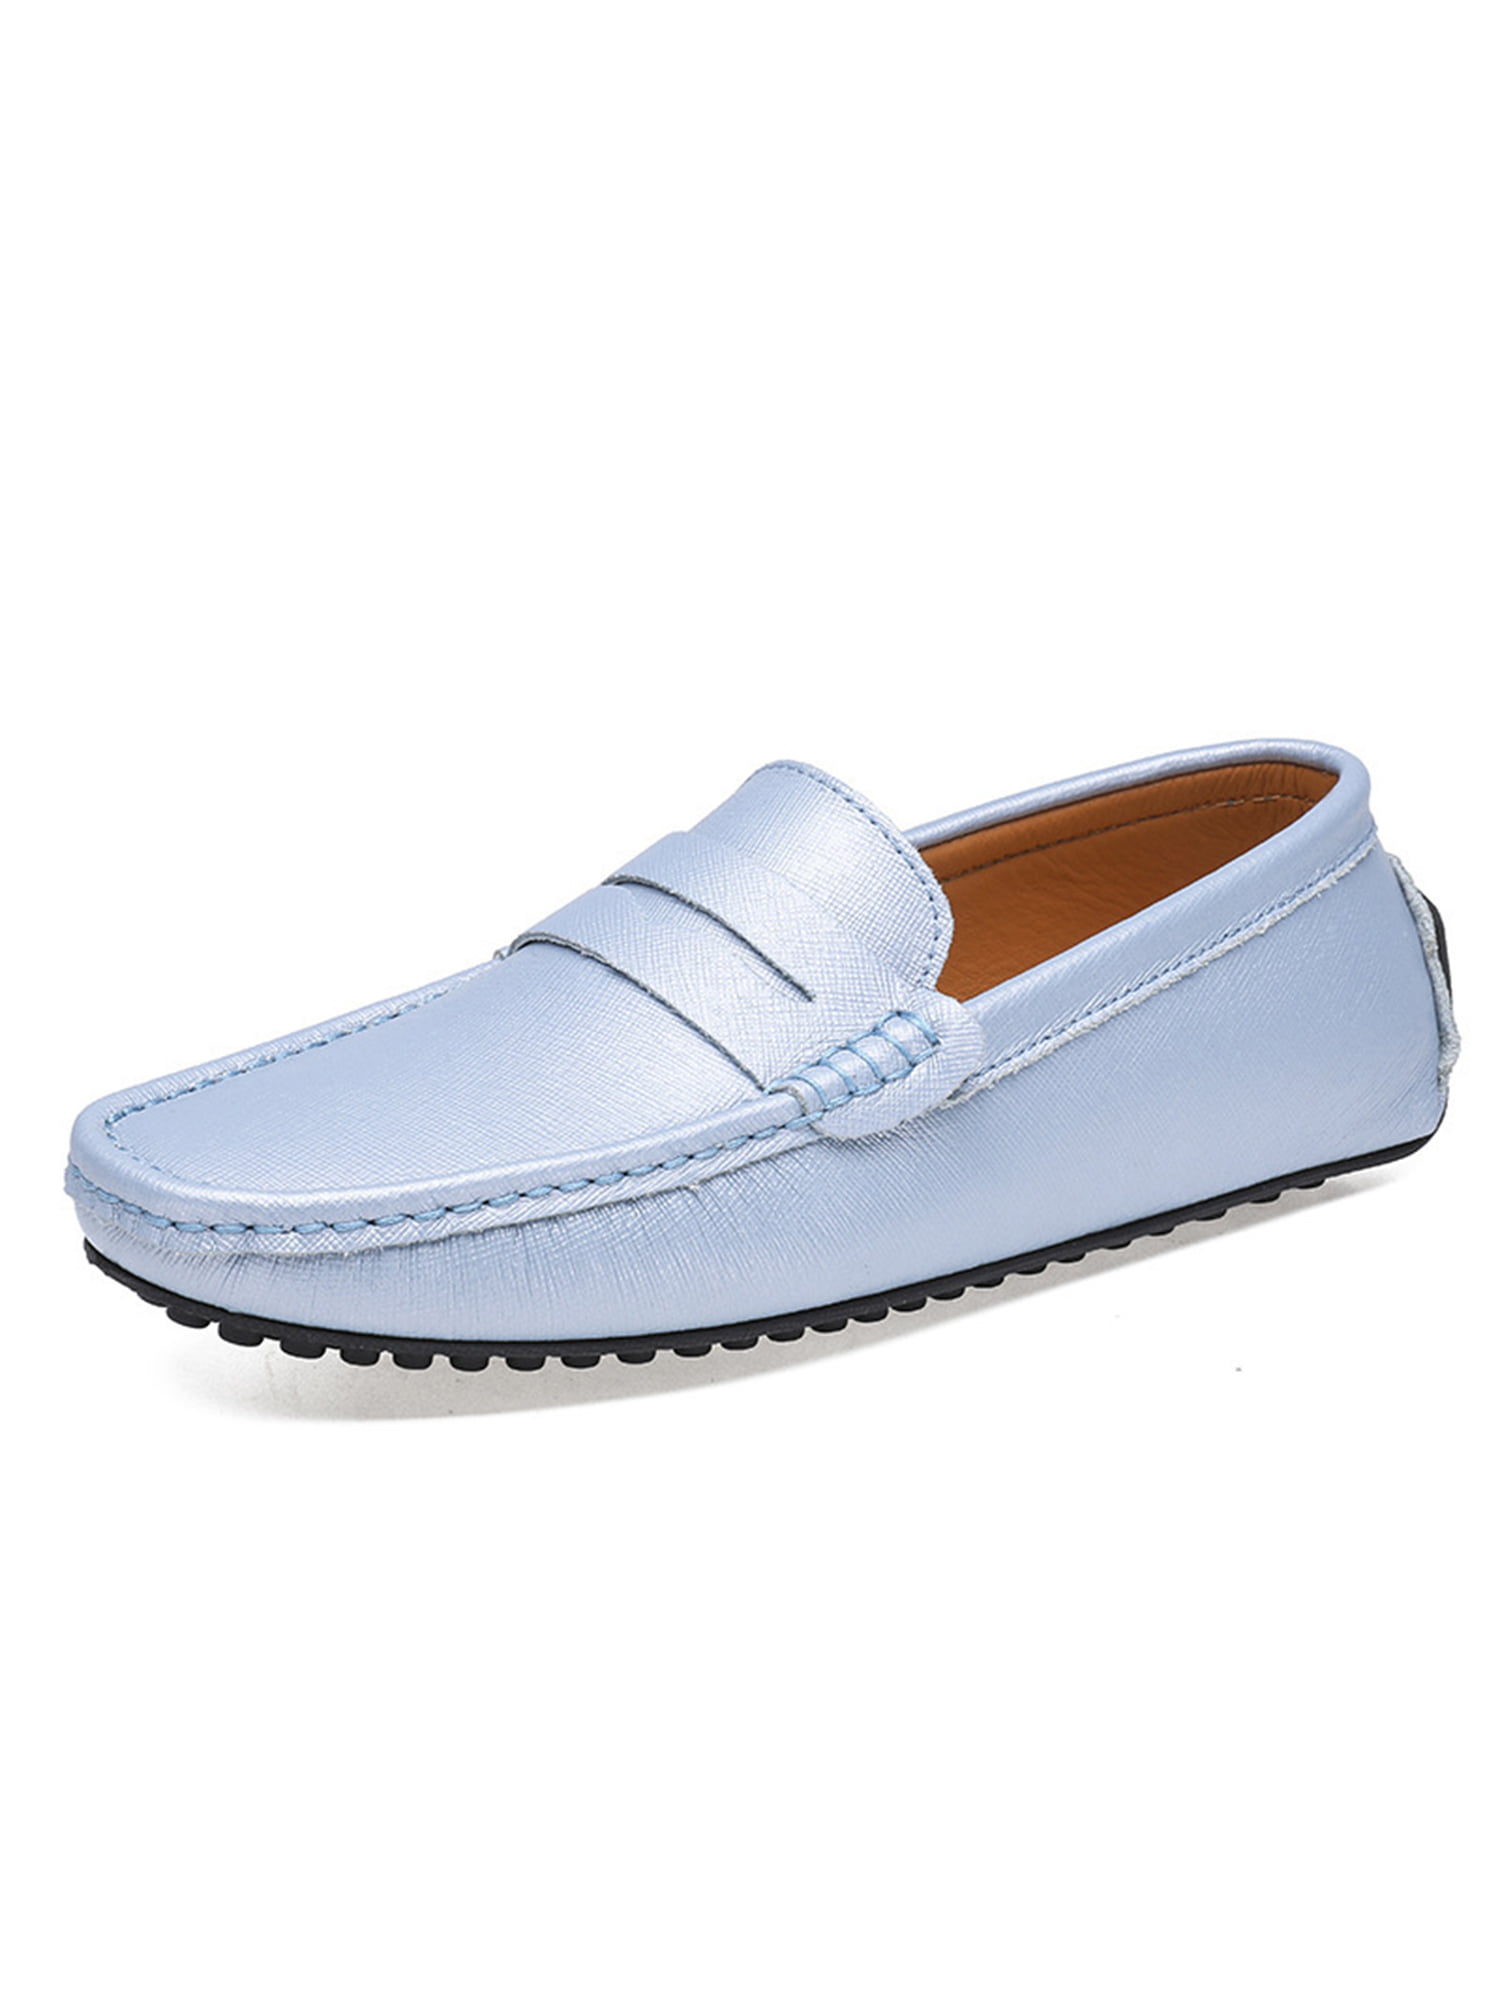 Hot Men's Slip On Round Toe Board Shoes Loafers Business Casual Driving SHOES SZ 